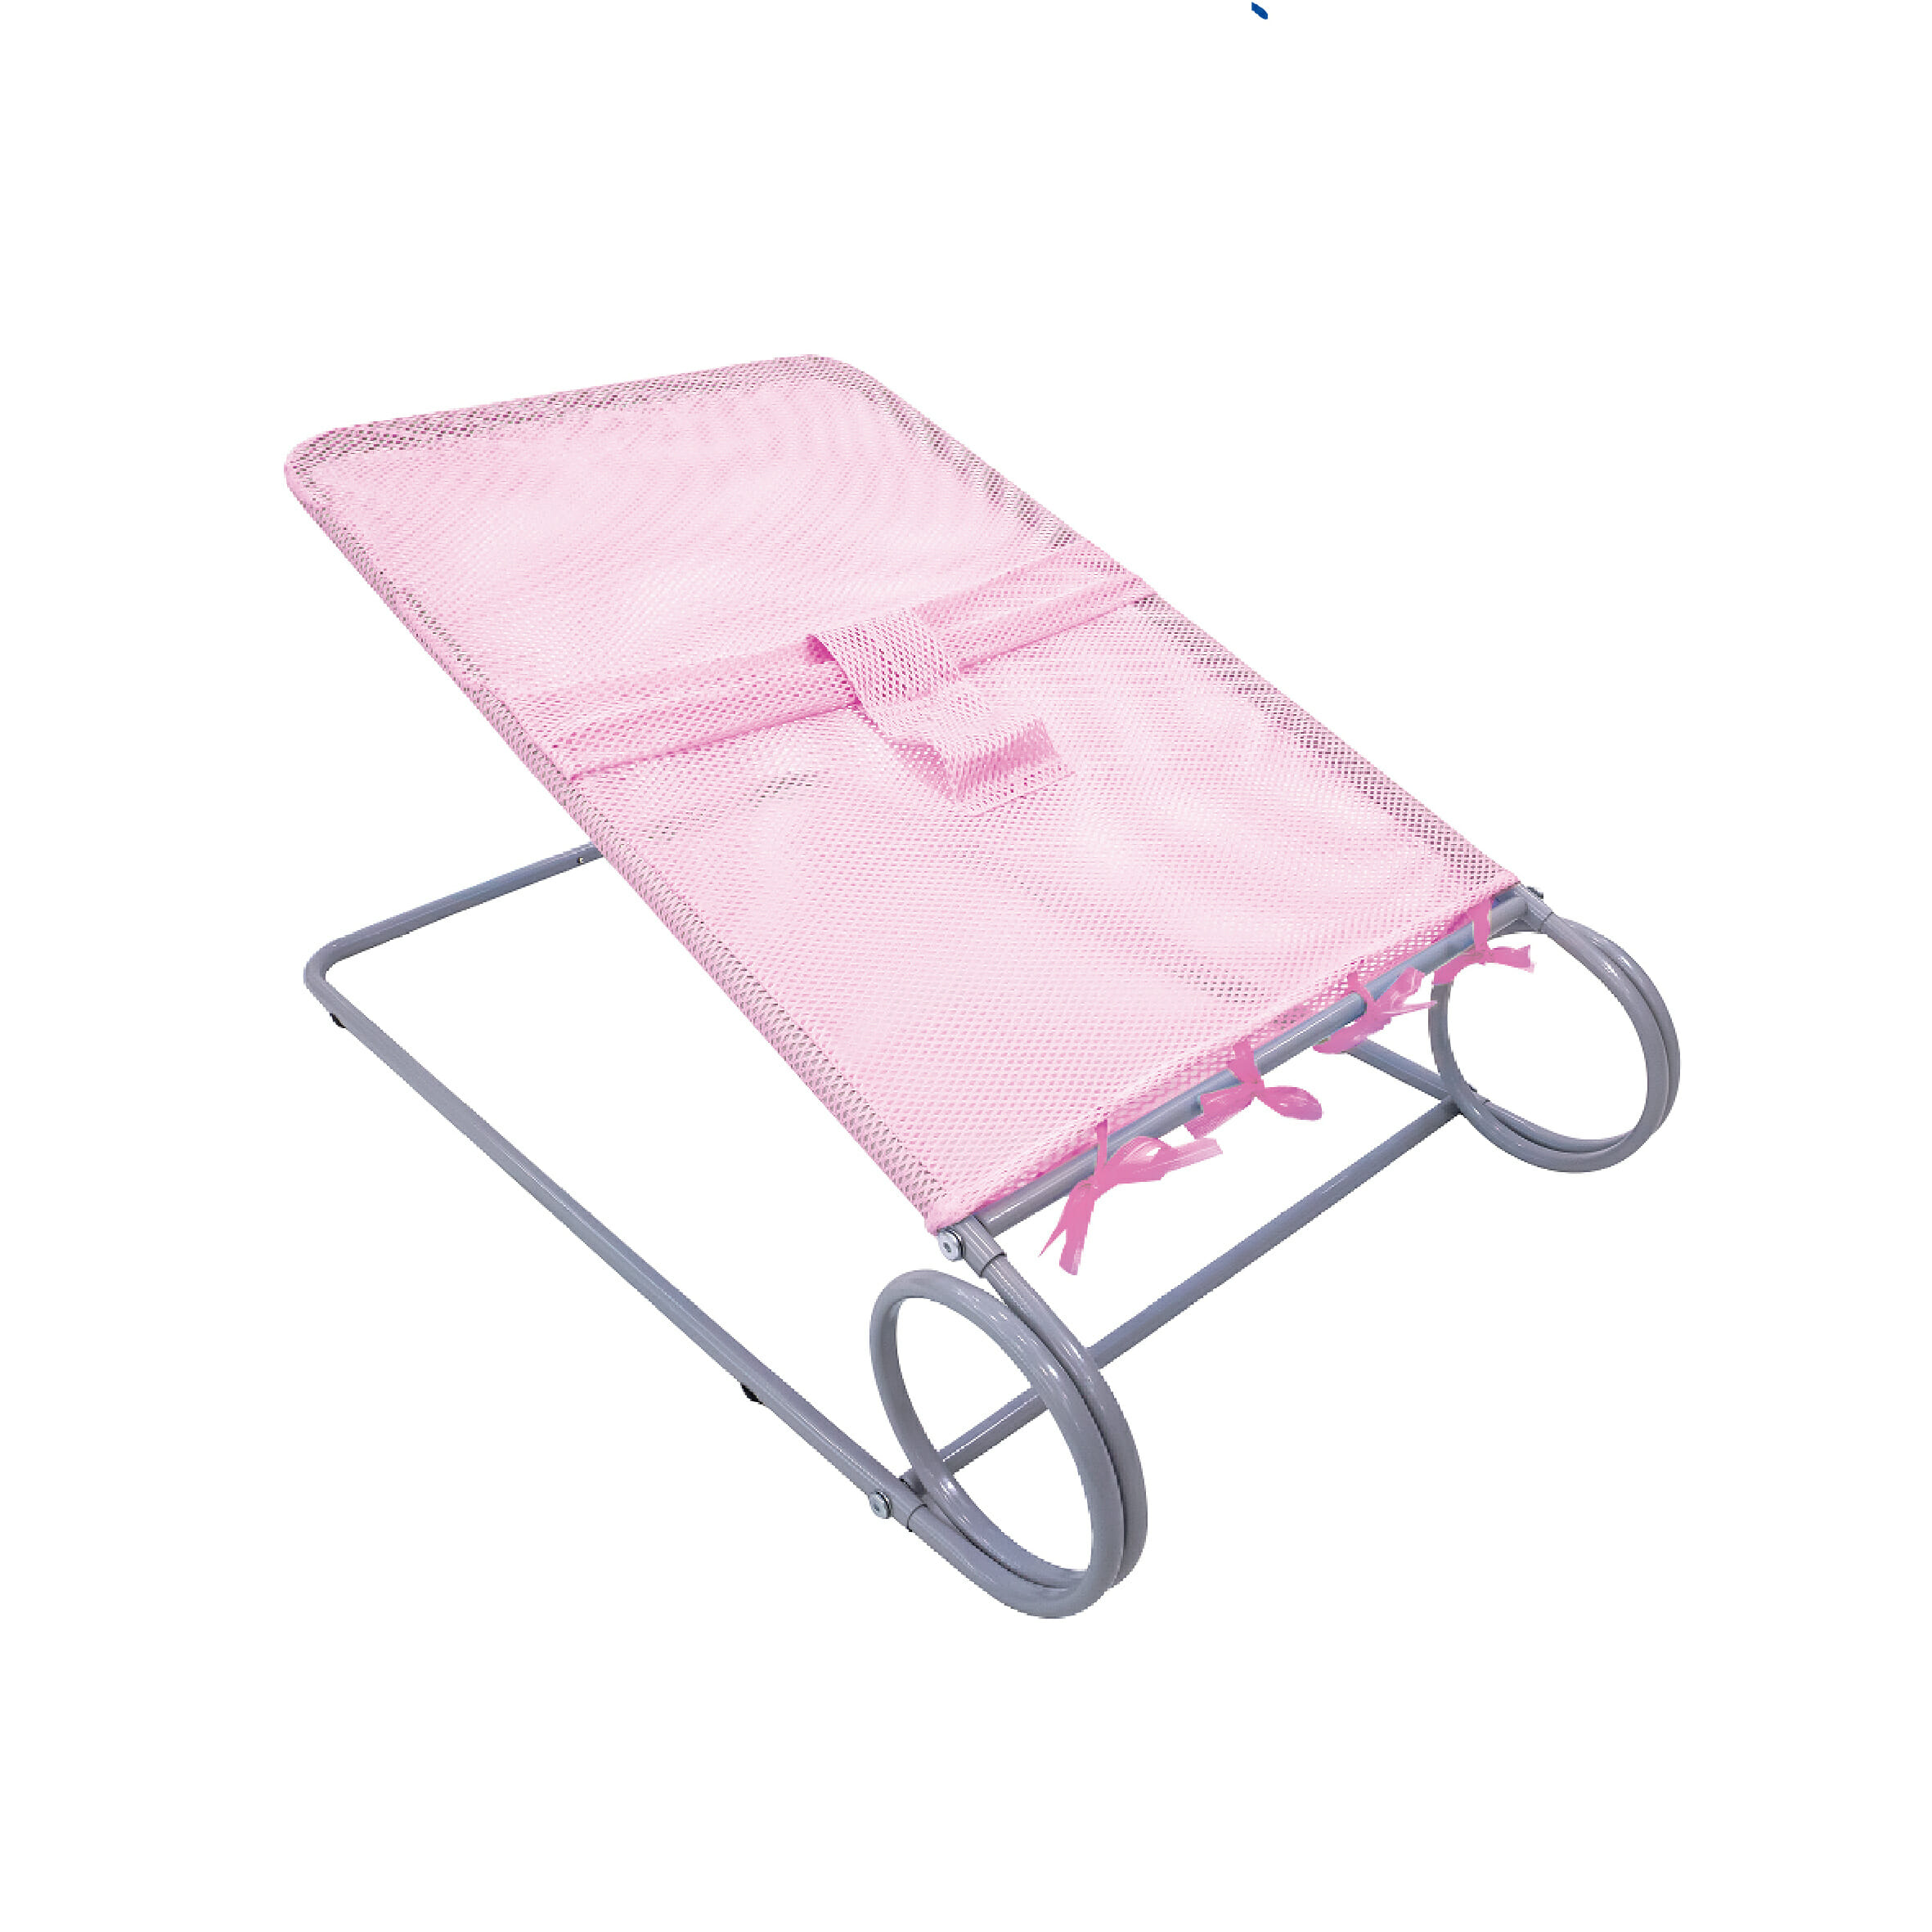 Babylove Compact Bouncer XL with Bouncer Net